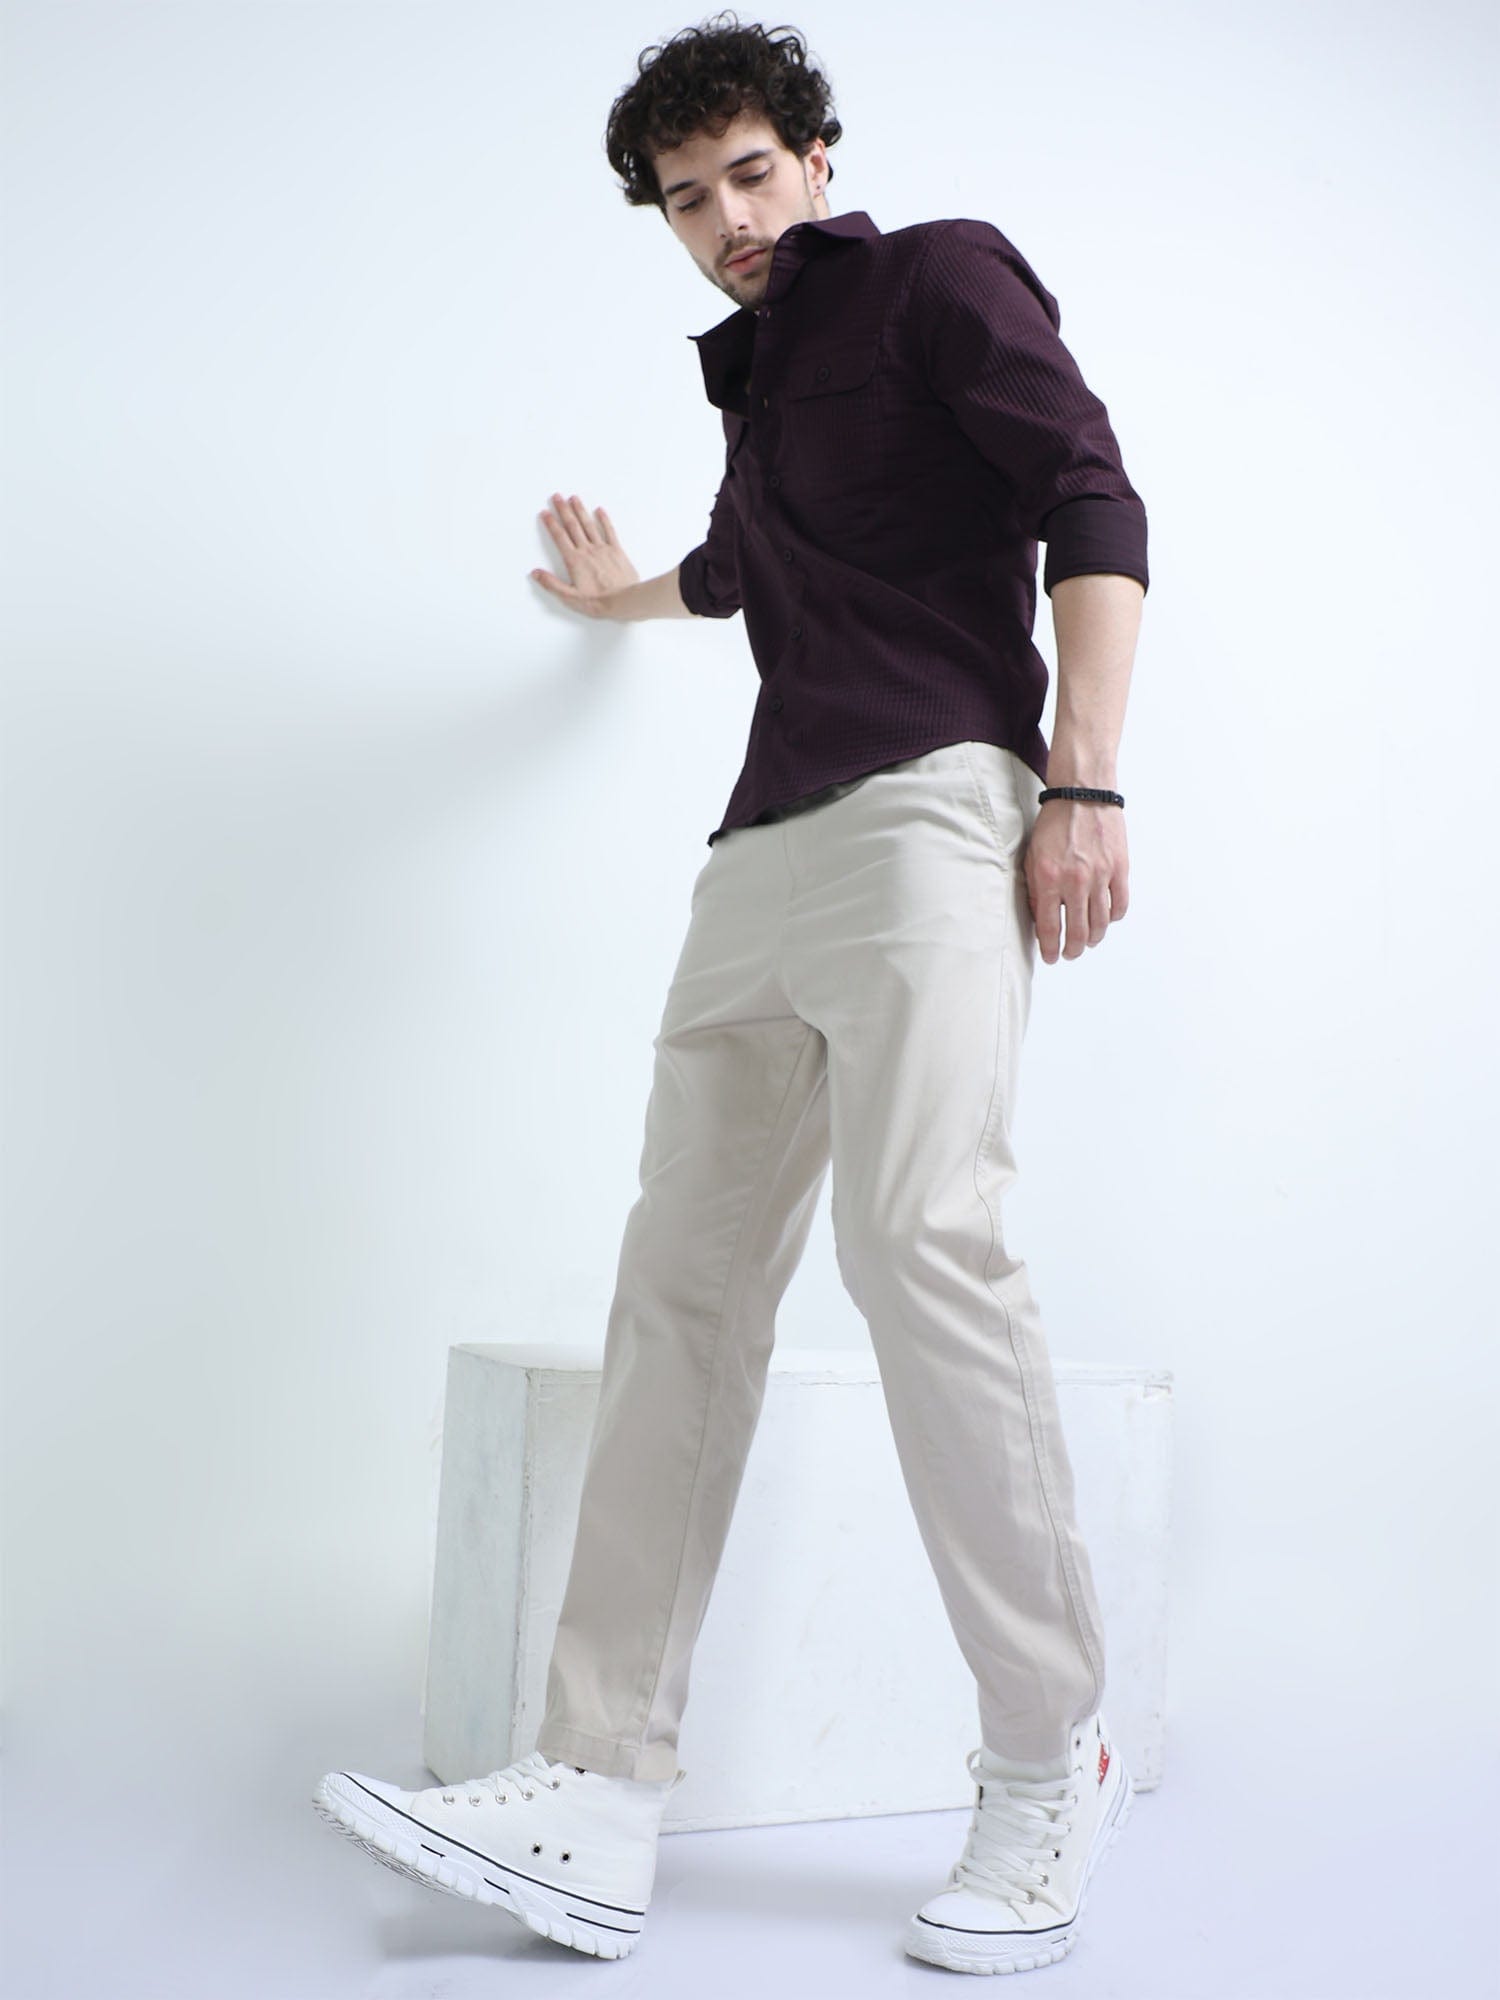 Shop Burnt Maroon Textured Solid Double Pocket ShirtRs. 1099.00